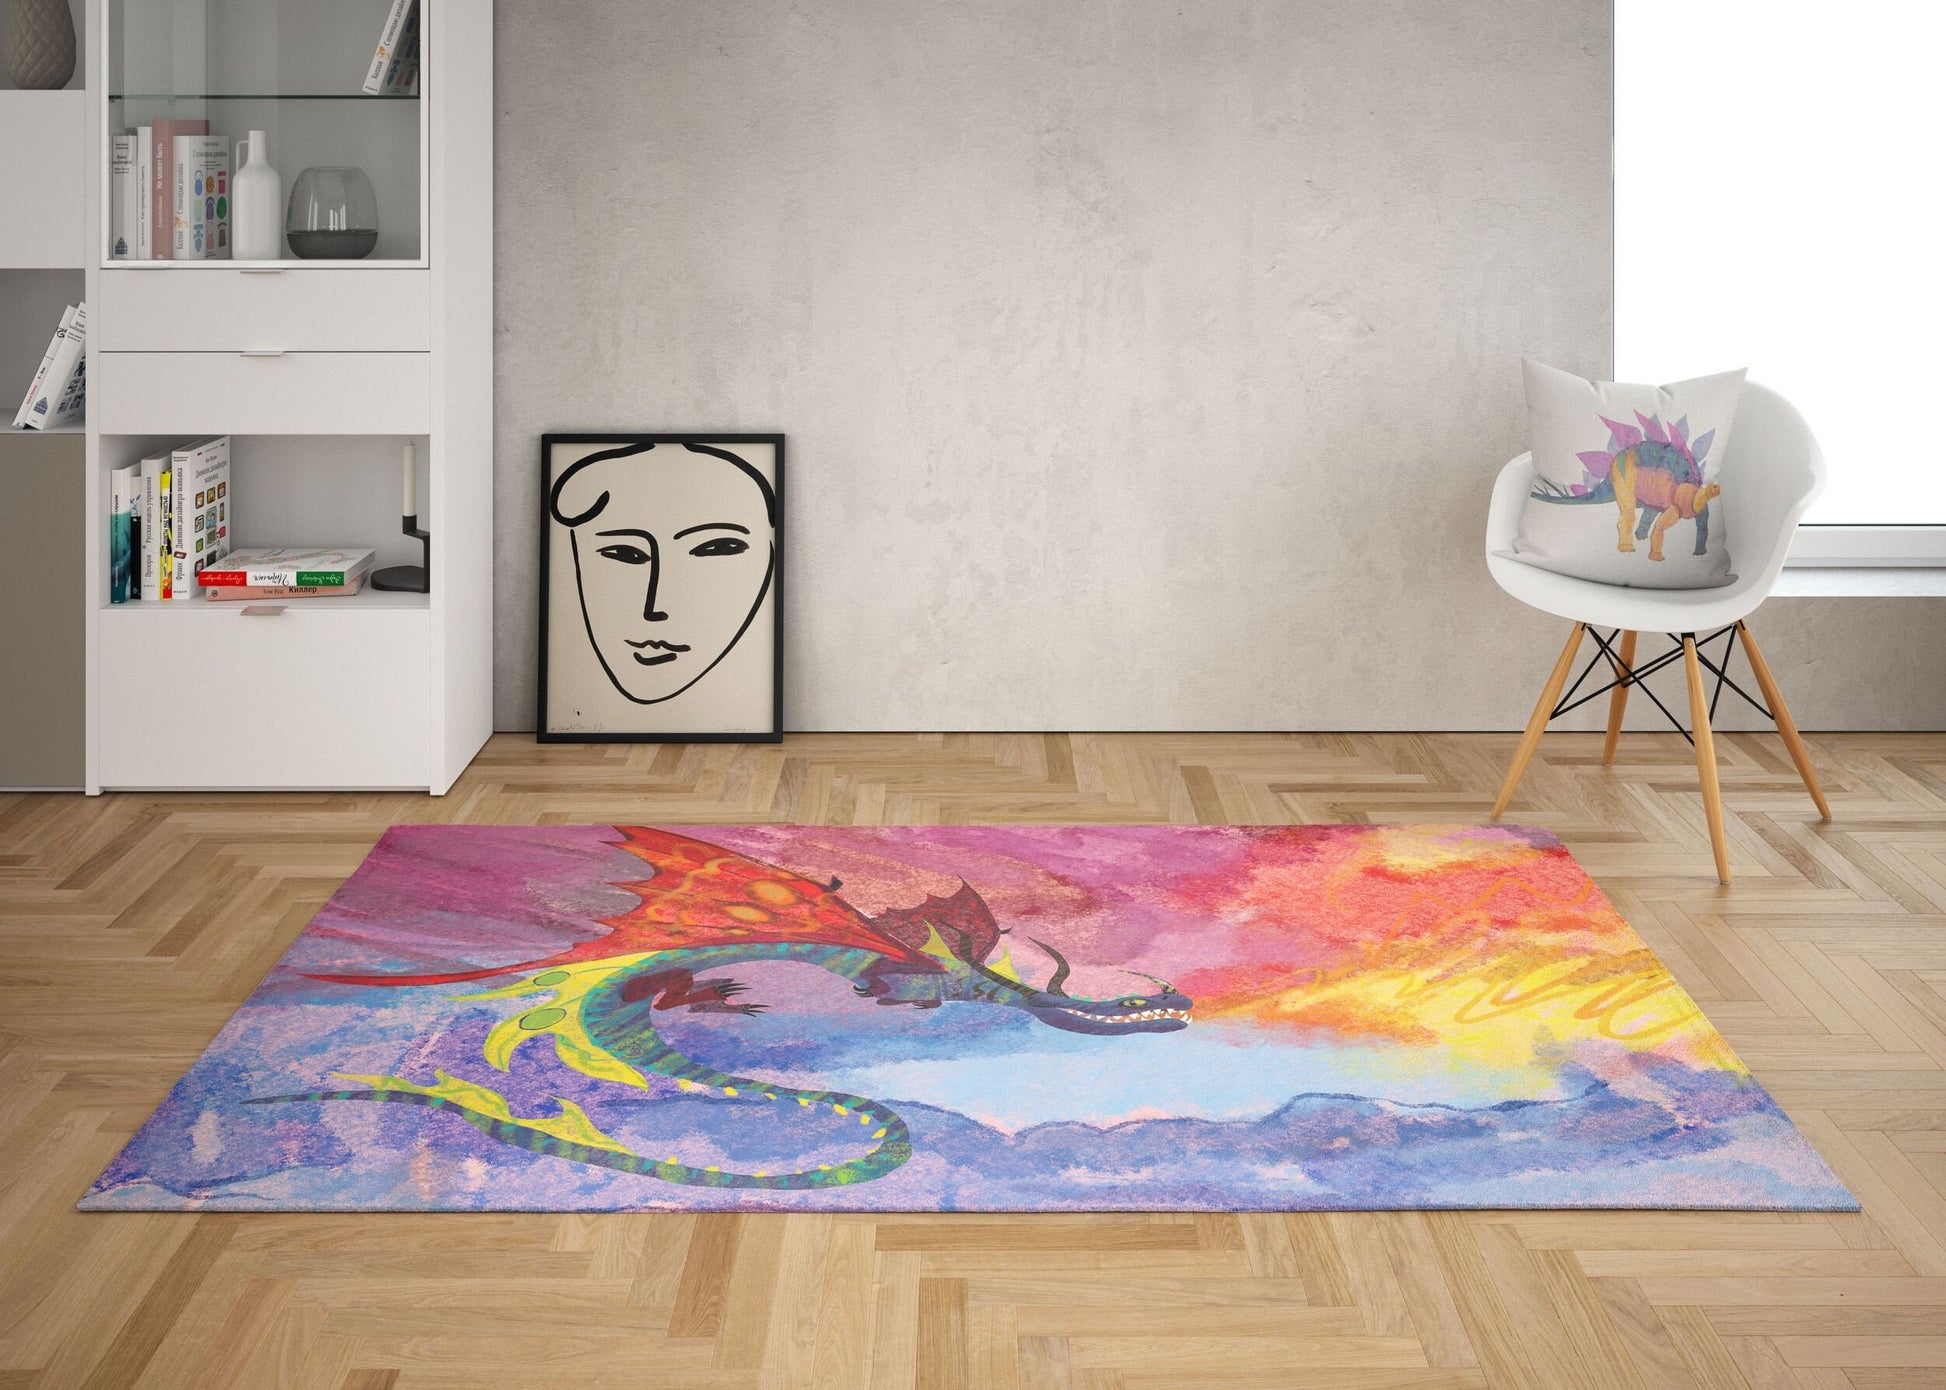 Kids Rug, Rugs And Carpet, Thick Carpet, Rectangle Area Rug, Red Blue Area Rug, Fire Breathing Dragon, Contemporary Rug, Made In USA